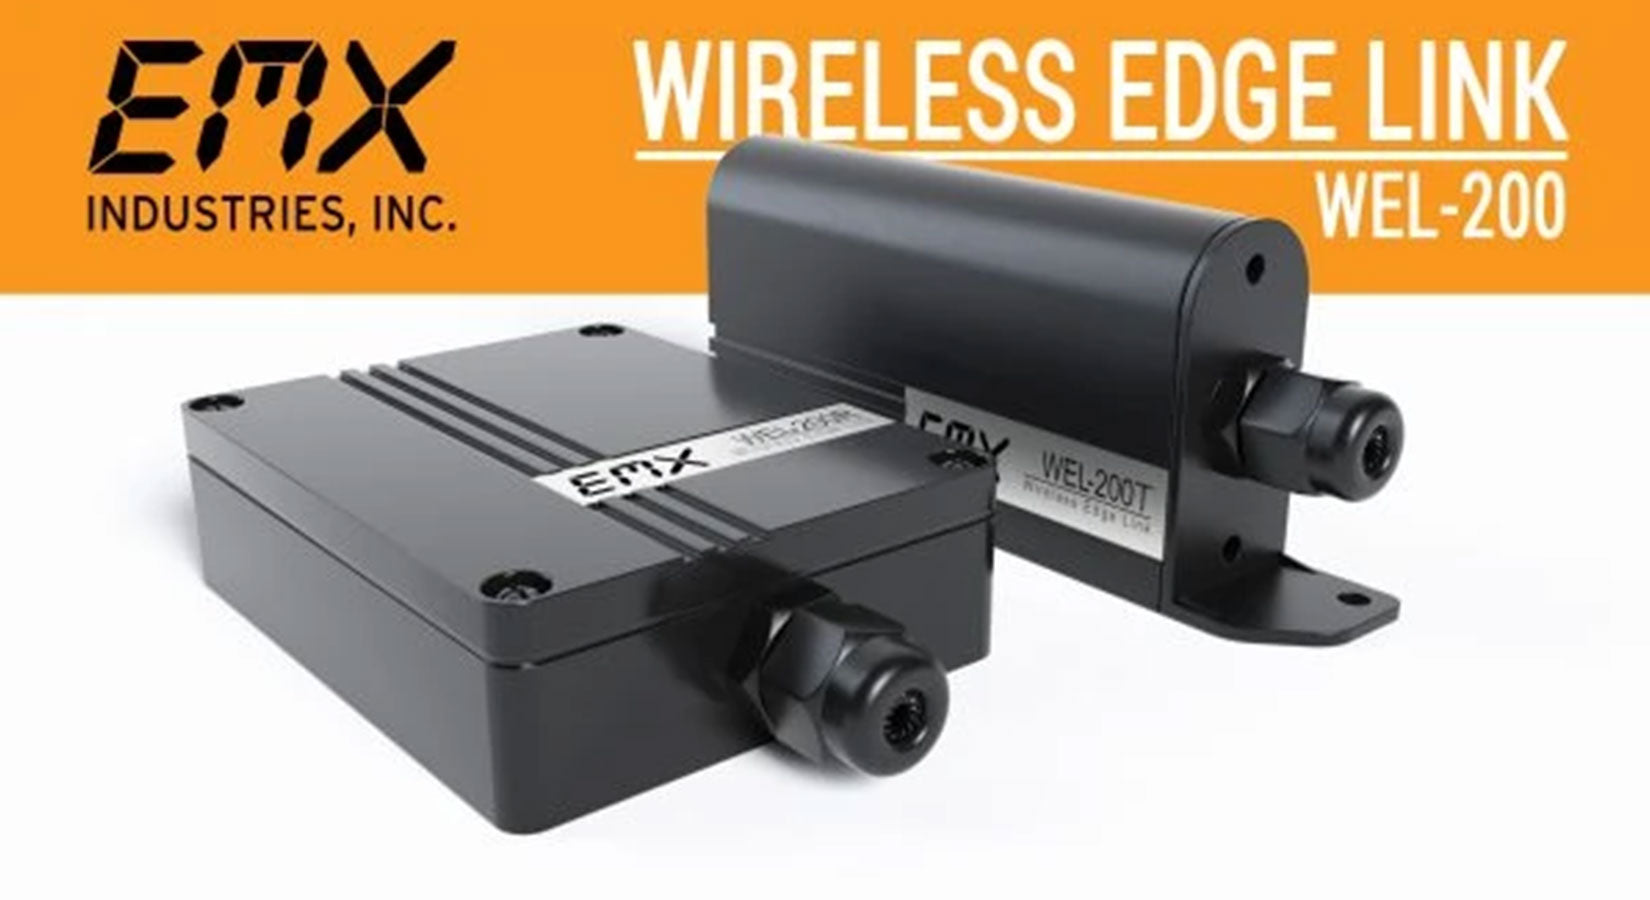 Learn the Dos and Don'ts of Using the EMX WEL-200 Wireless Edge Link | All Security Equipment